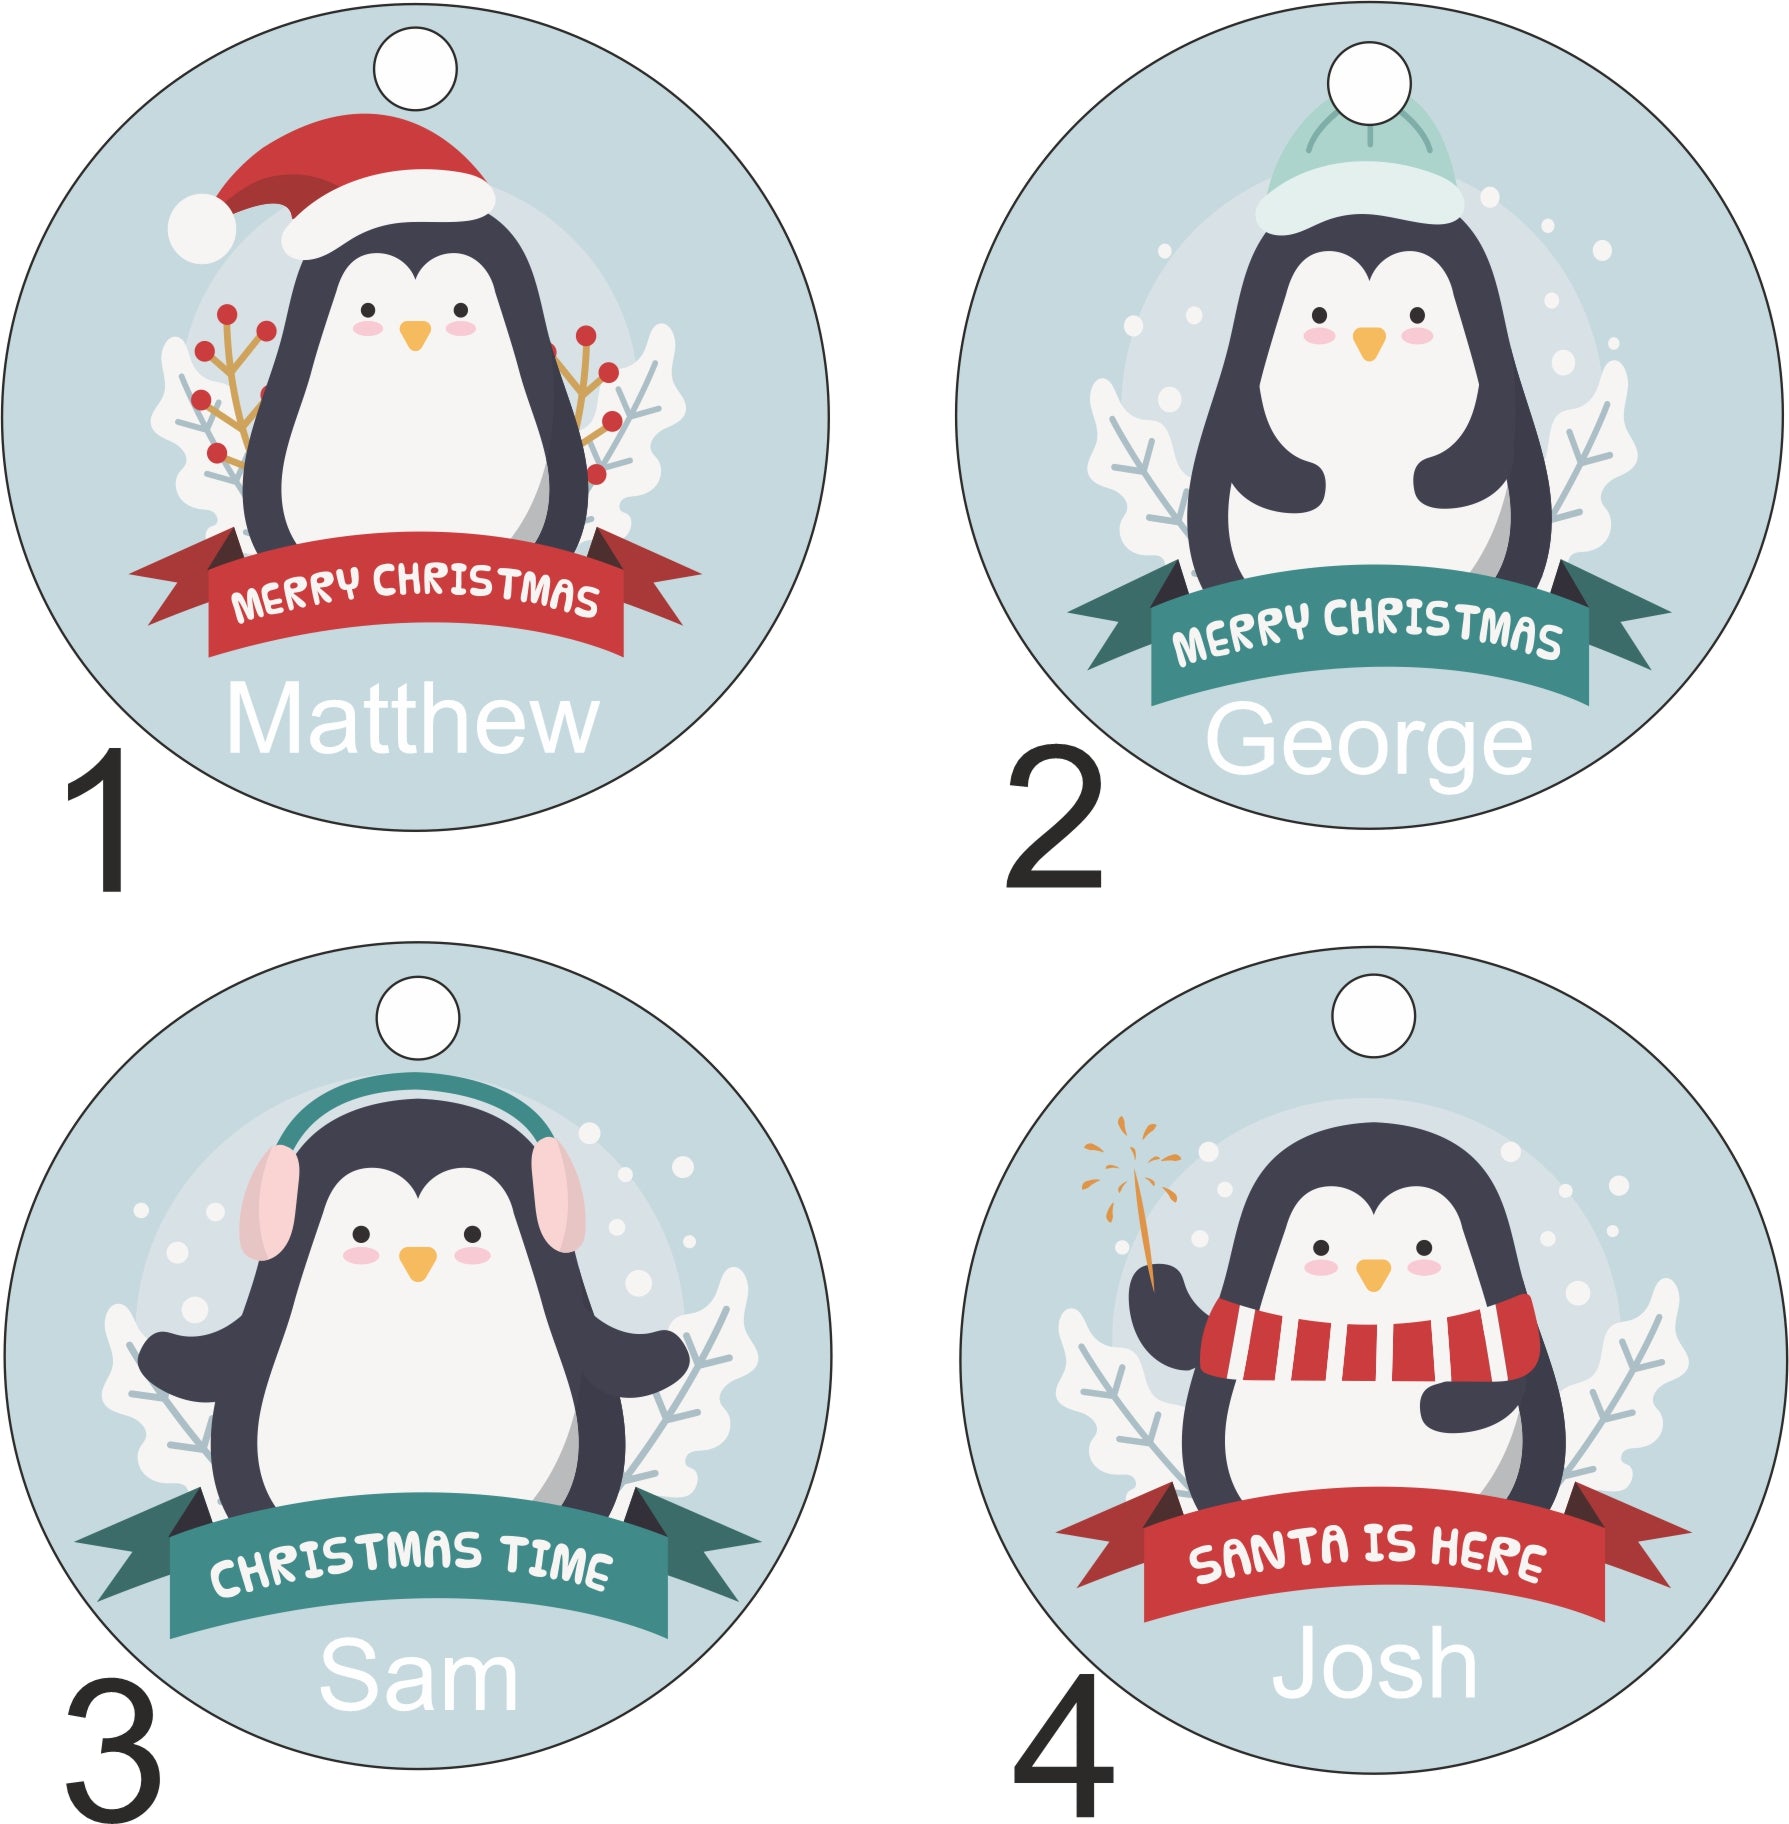 Penguin Design Personalised Christmas Bauble - Custom Designed Baubles Printed with Any Name - Ideal as a Gift Tag